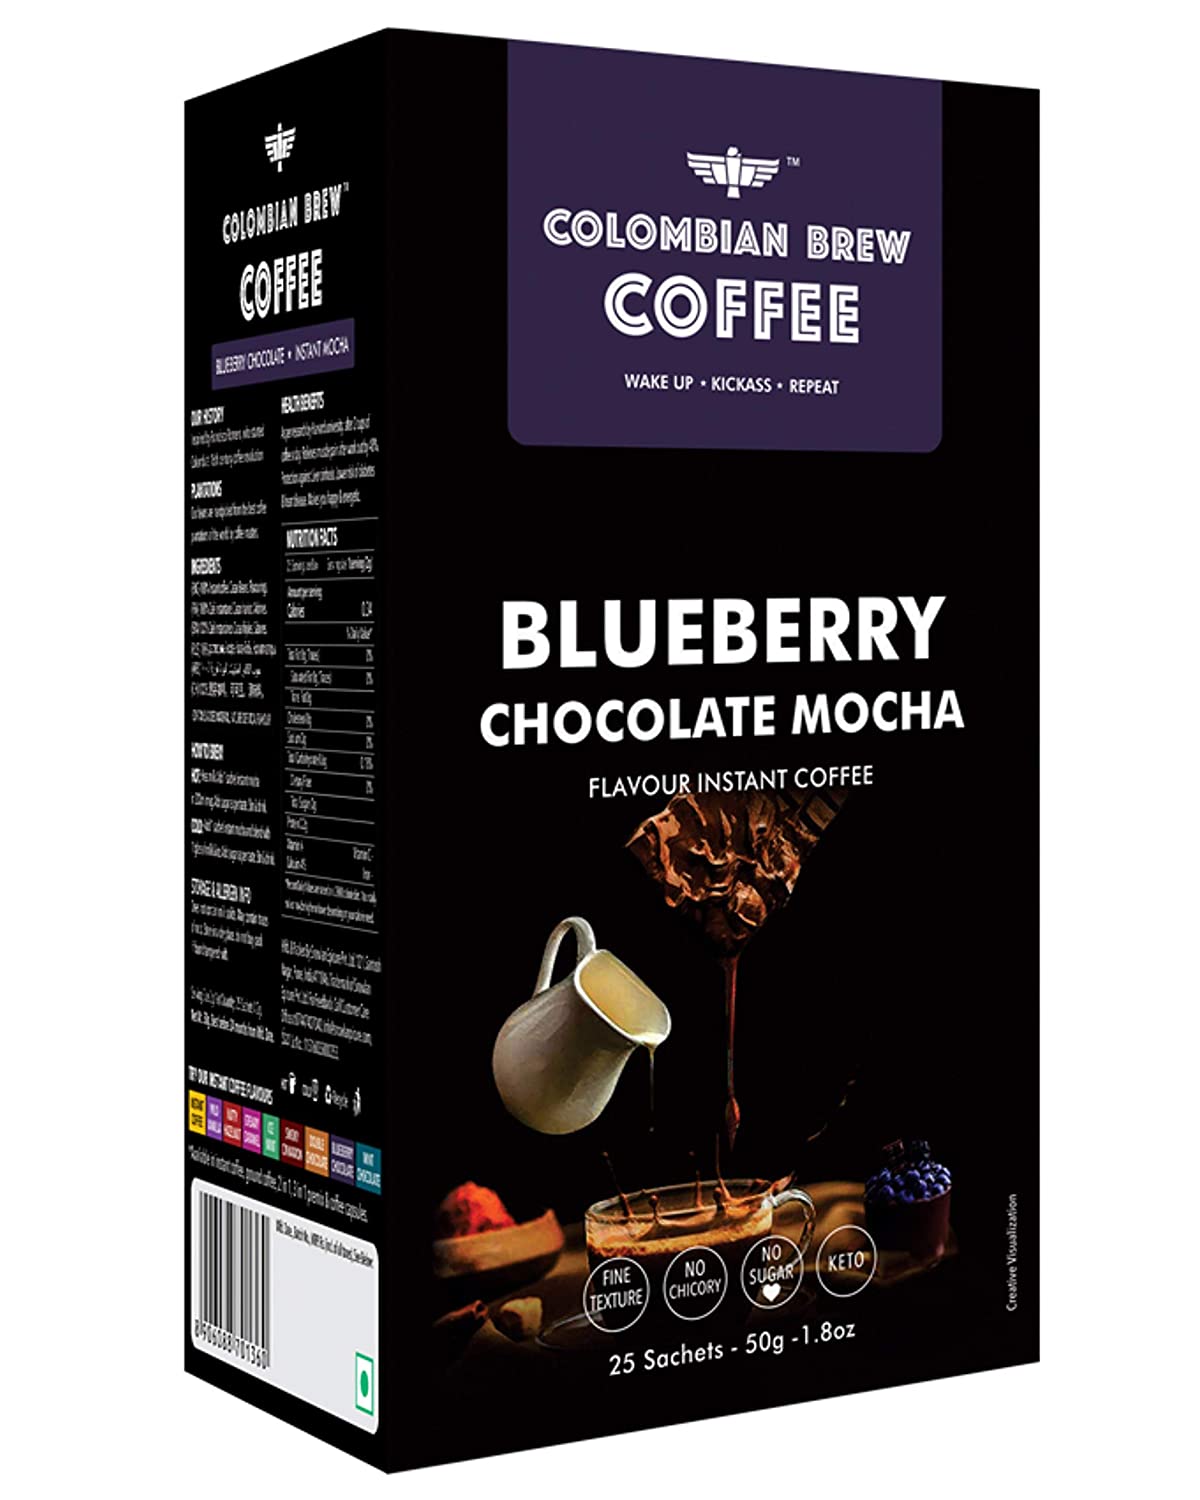 Colombia Brew Coffee Blueberry Chocolate Mocha Instant Coffee Image